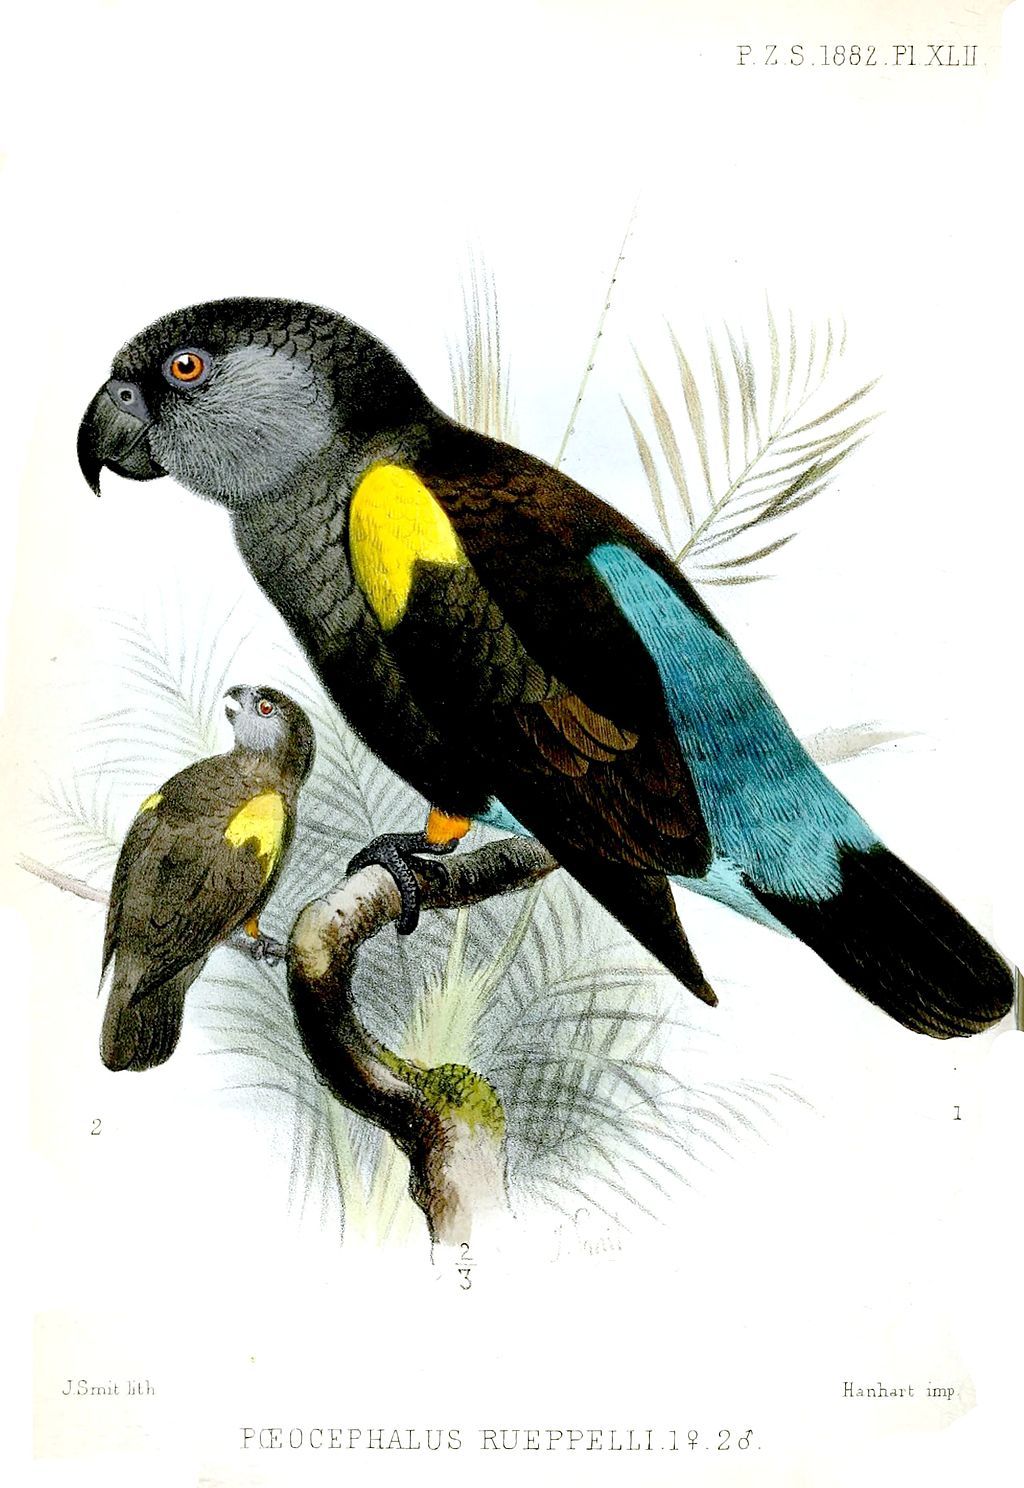 Rüppell's parrot painting by Joseph Smit, a Dutch zoological illustrator (1836-1929)